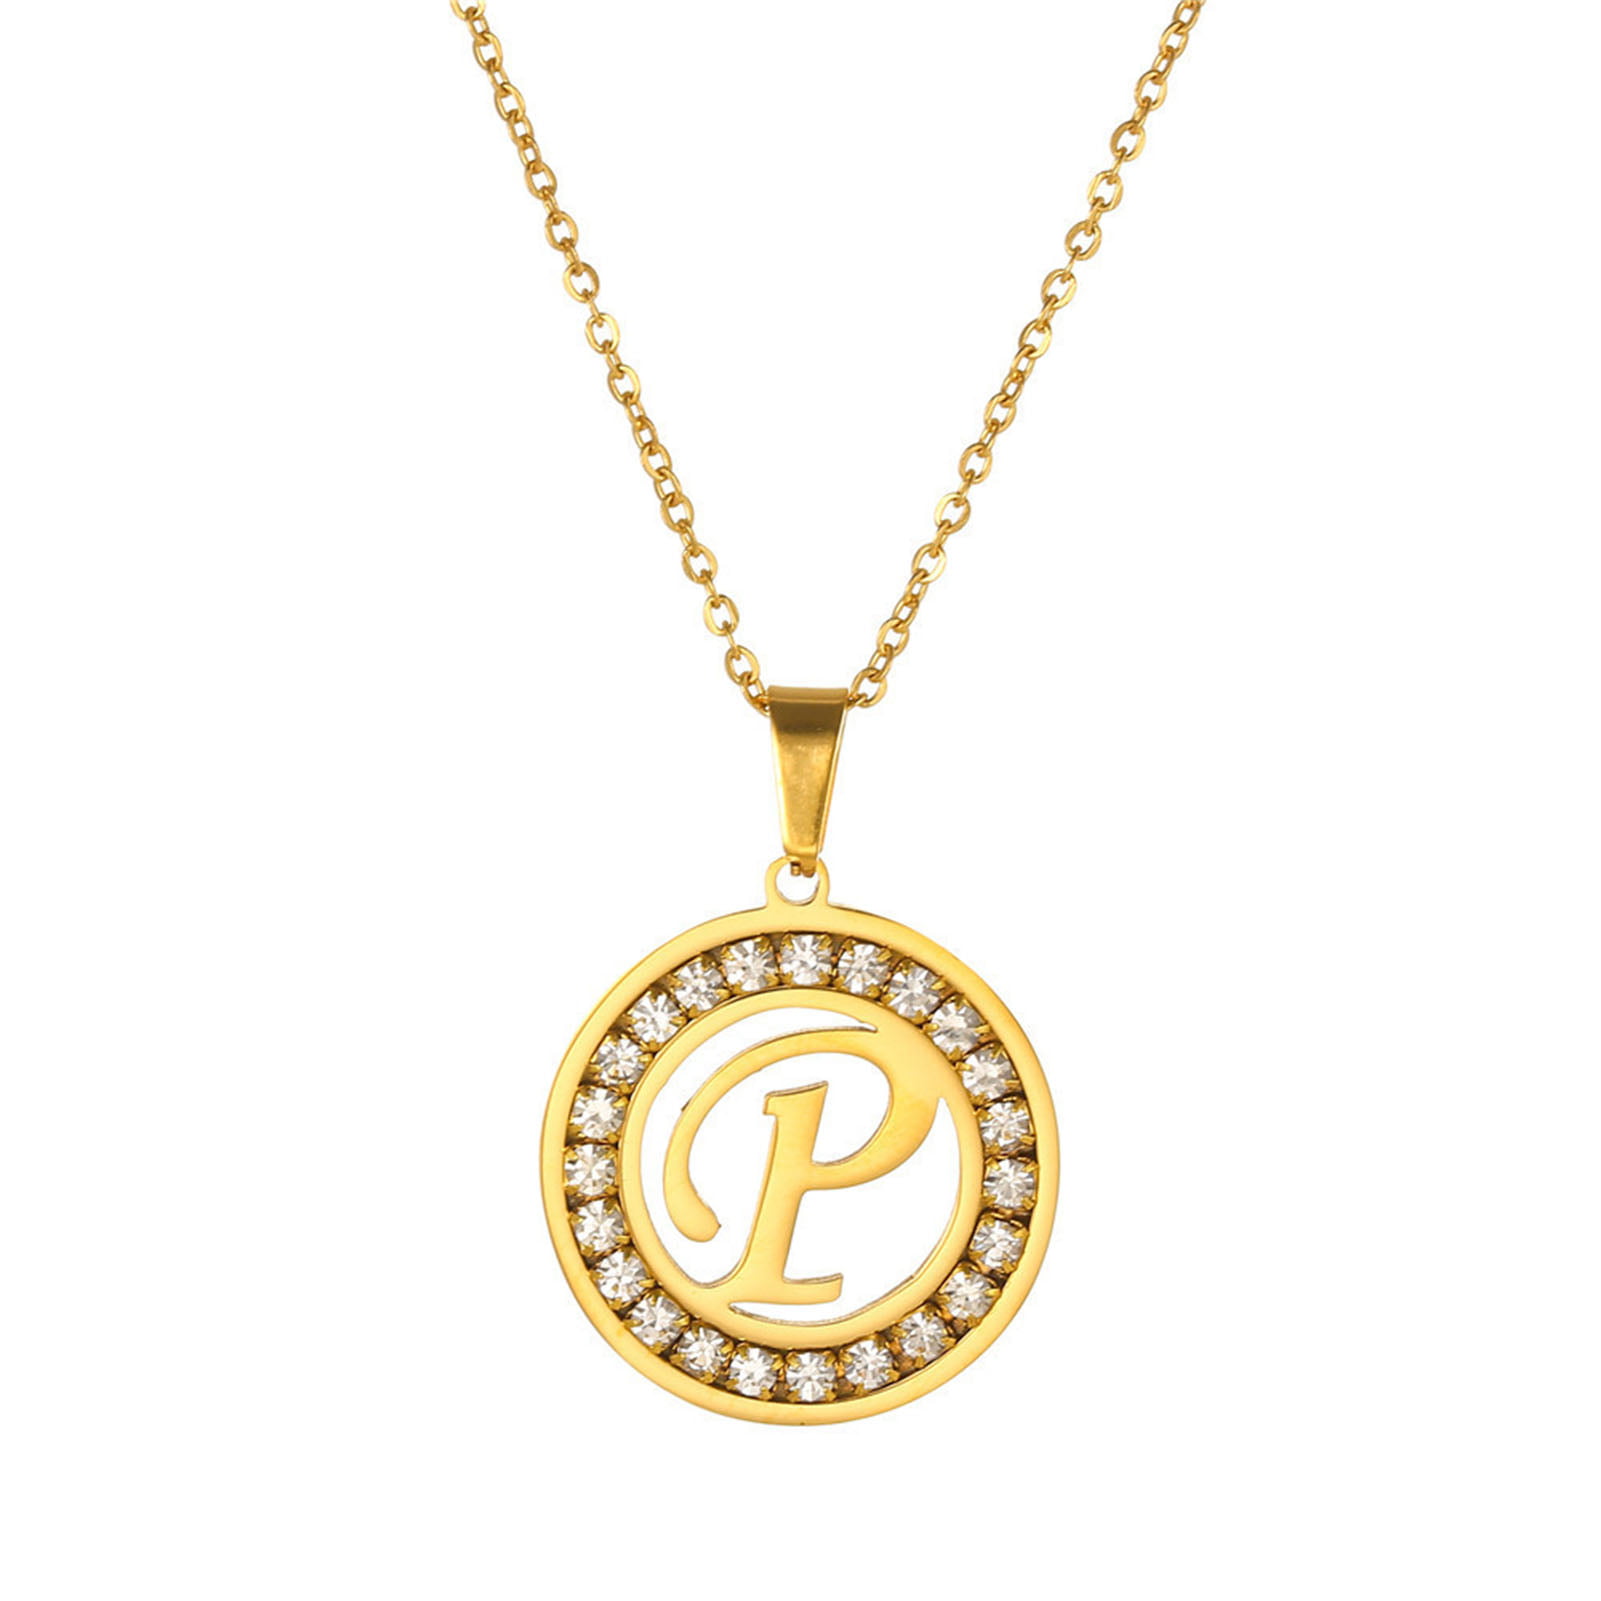 Elegant Gold Plated Alloy Letter Pendant Shiny Clavicle Chain Necklace Gift